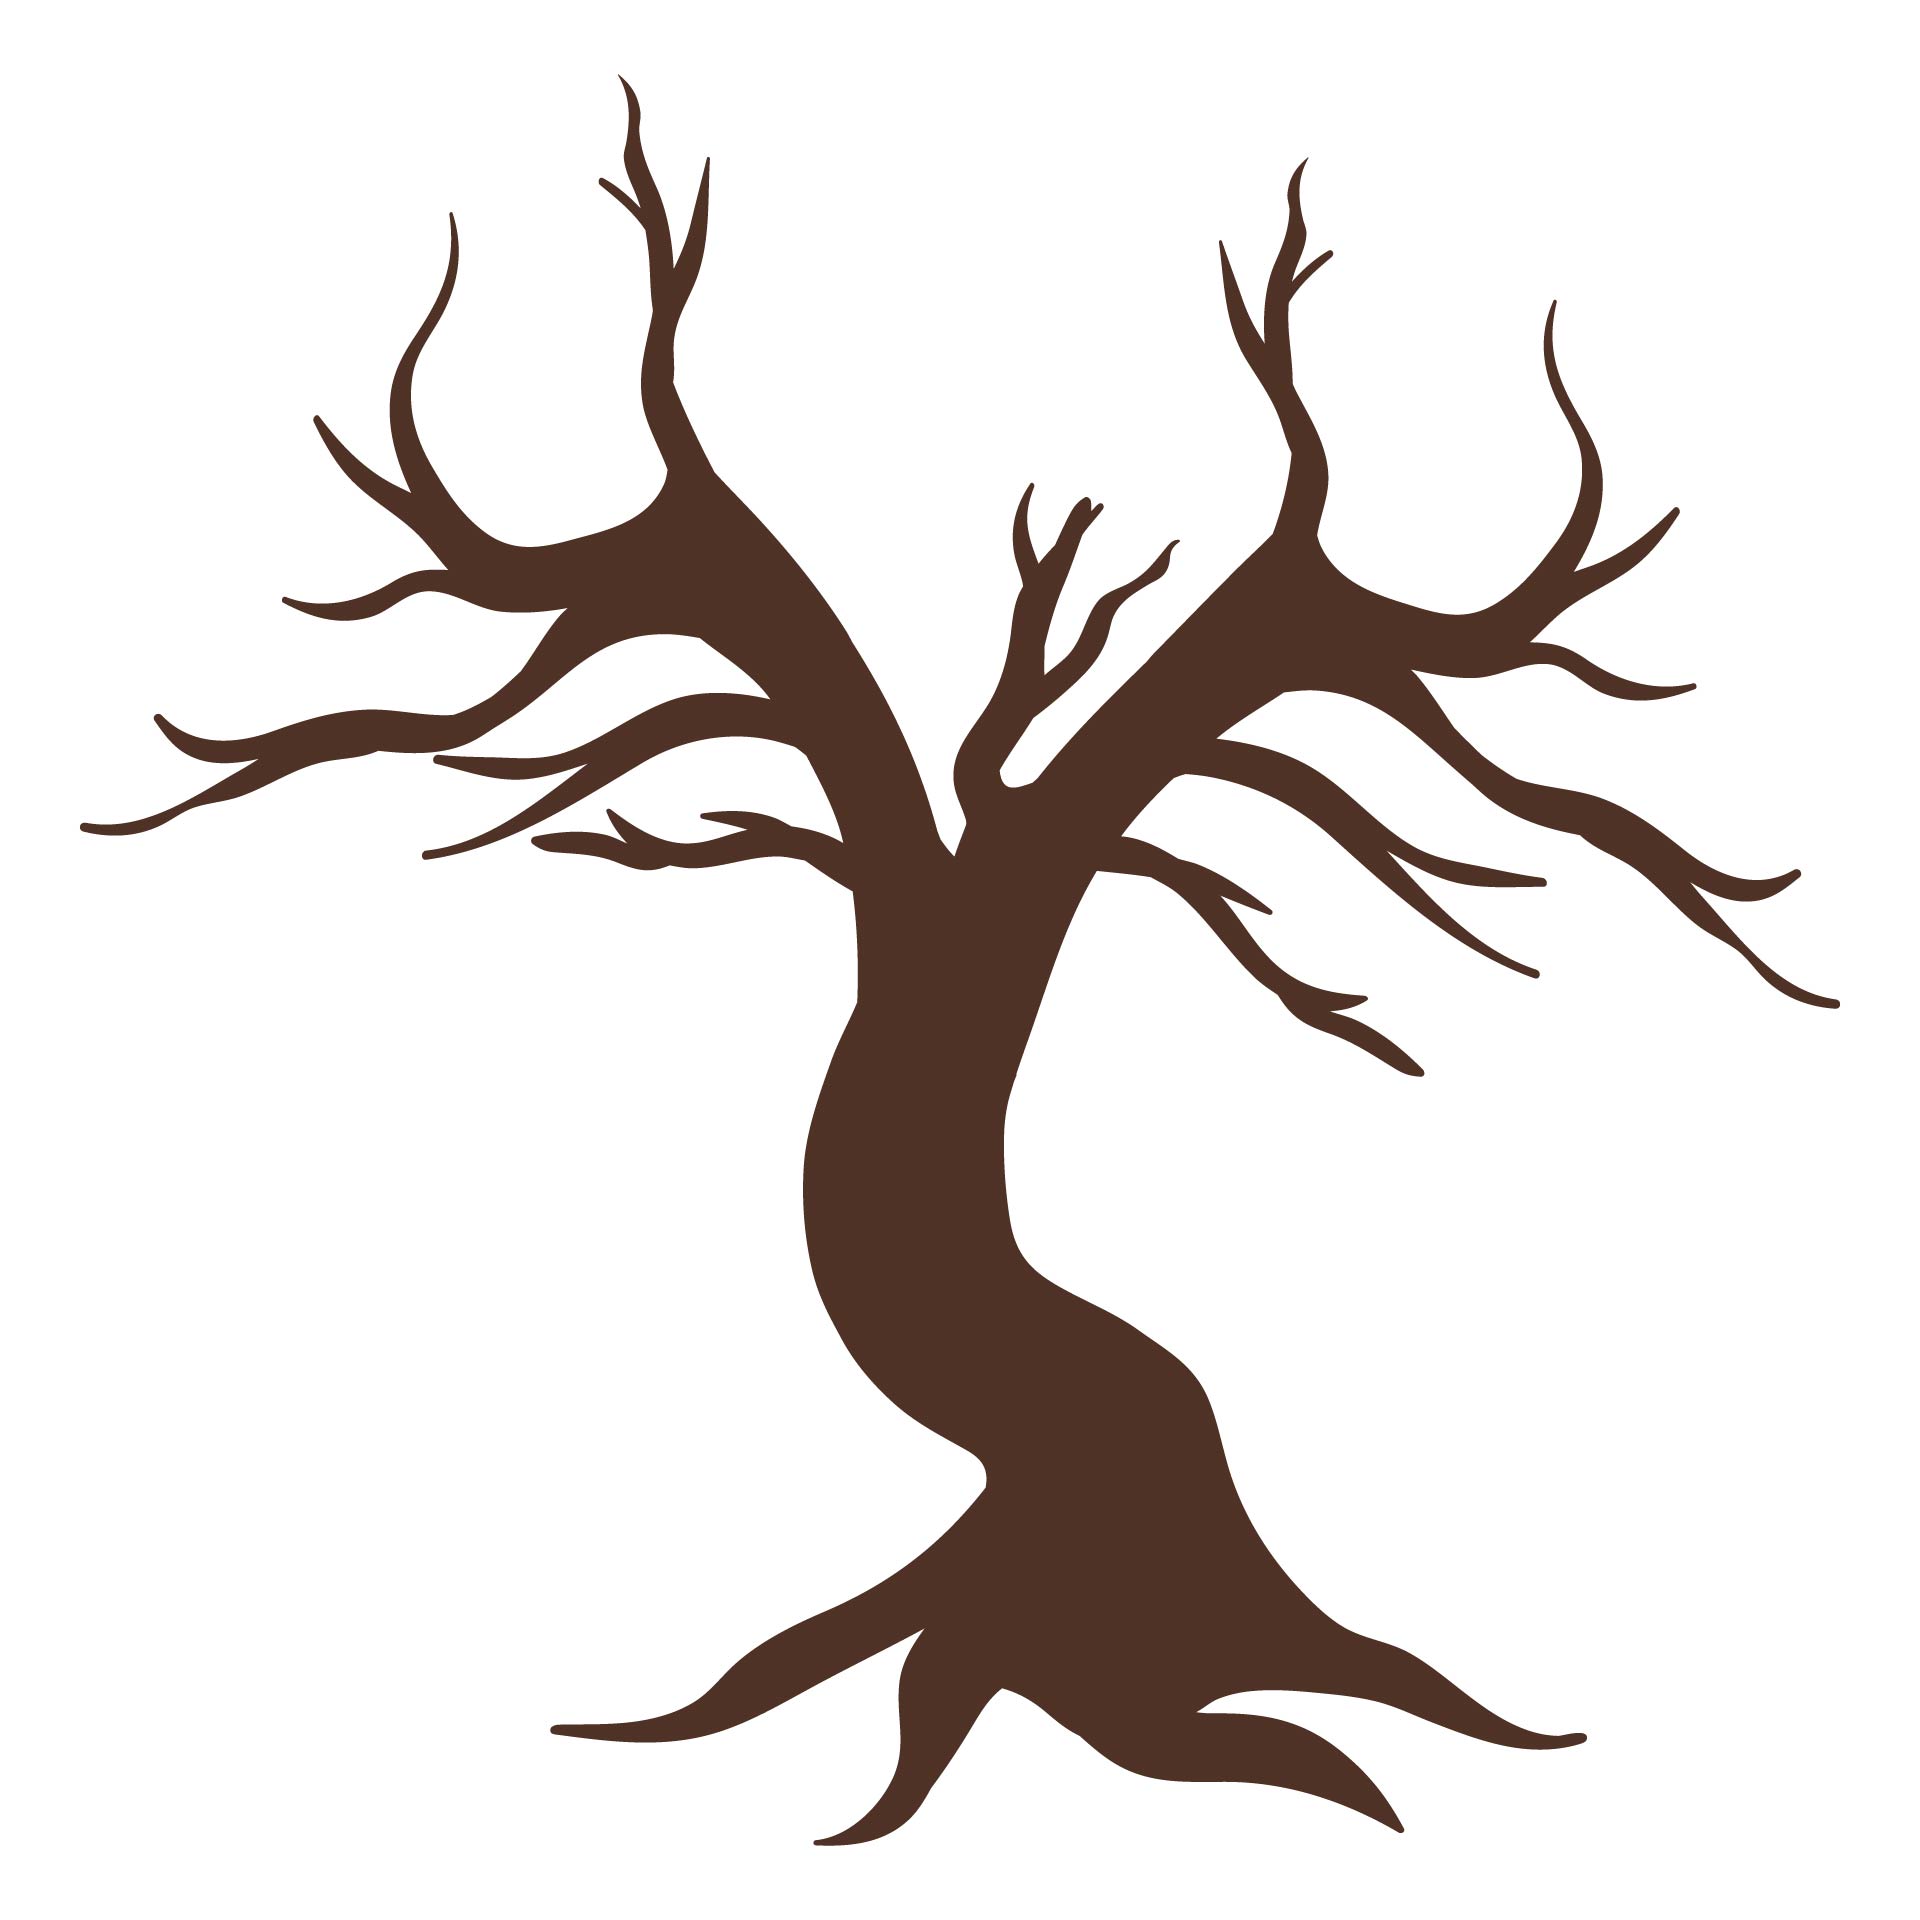  Printable Tree without Leaves